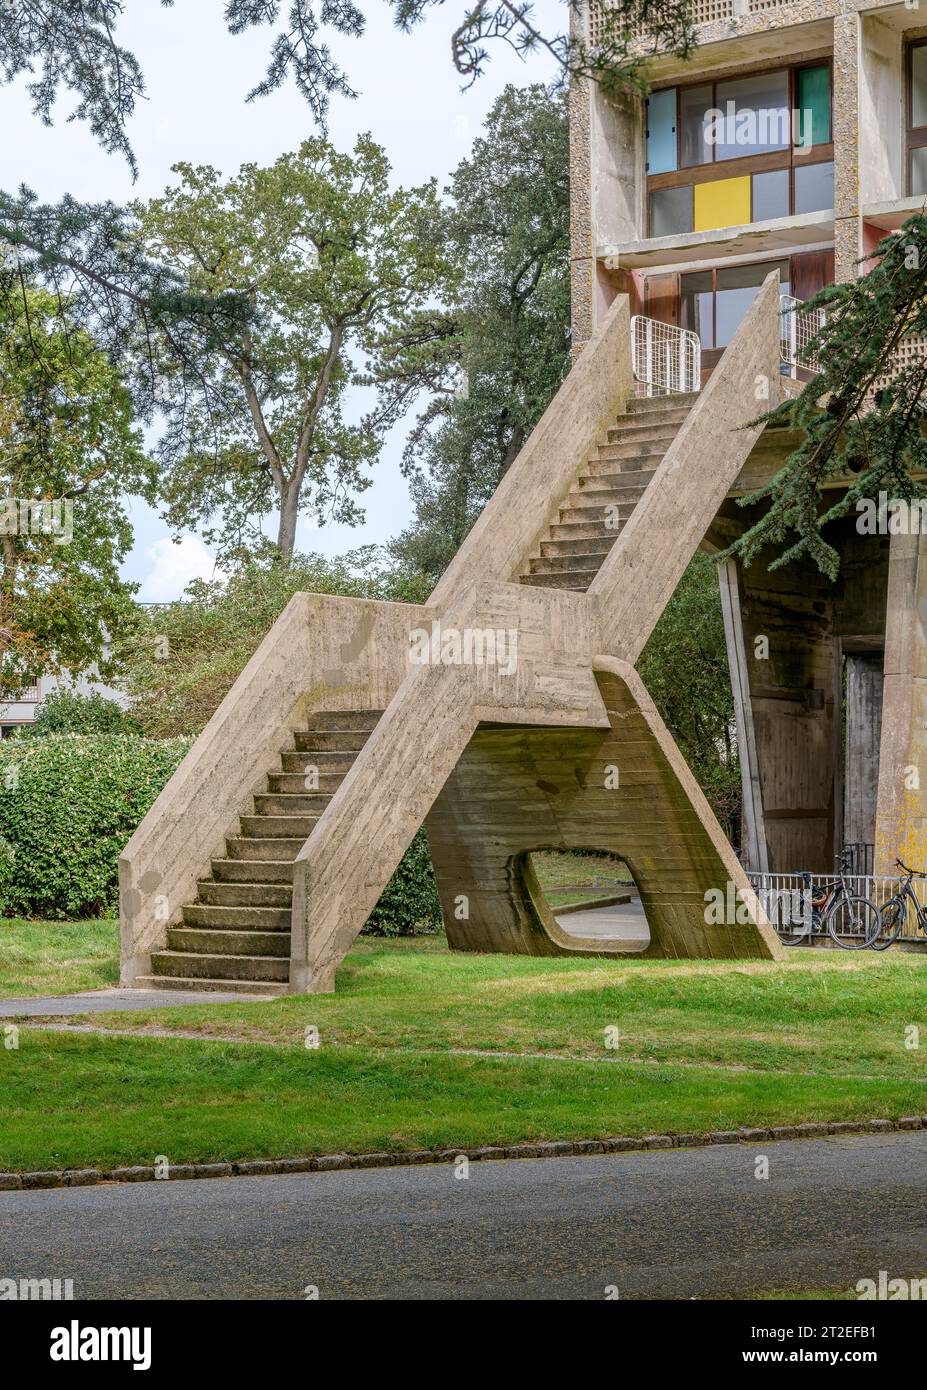 The only outside staircase at Le Corbusier’s Maison d'Habitation in Reze south of Nantes. Also known as La Maison Radieuse Le Corbusier. Stock Photo